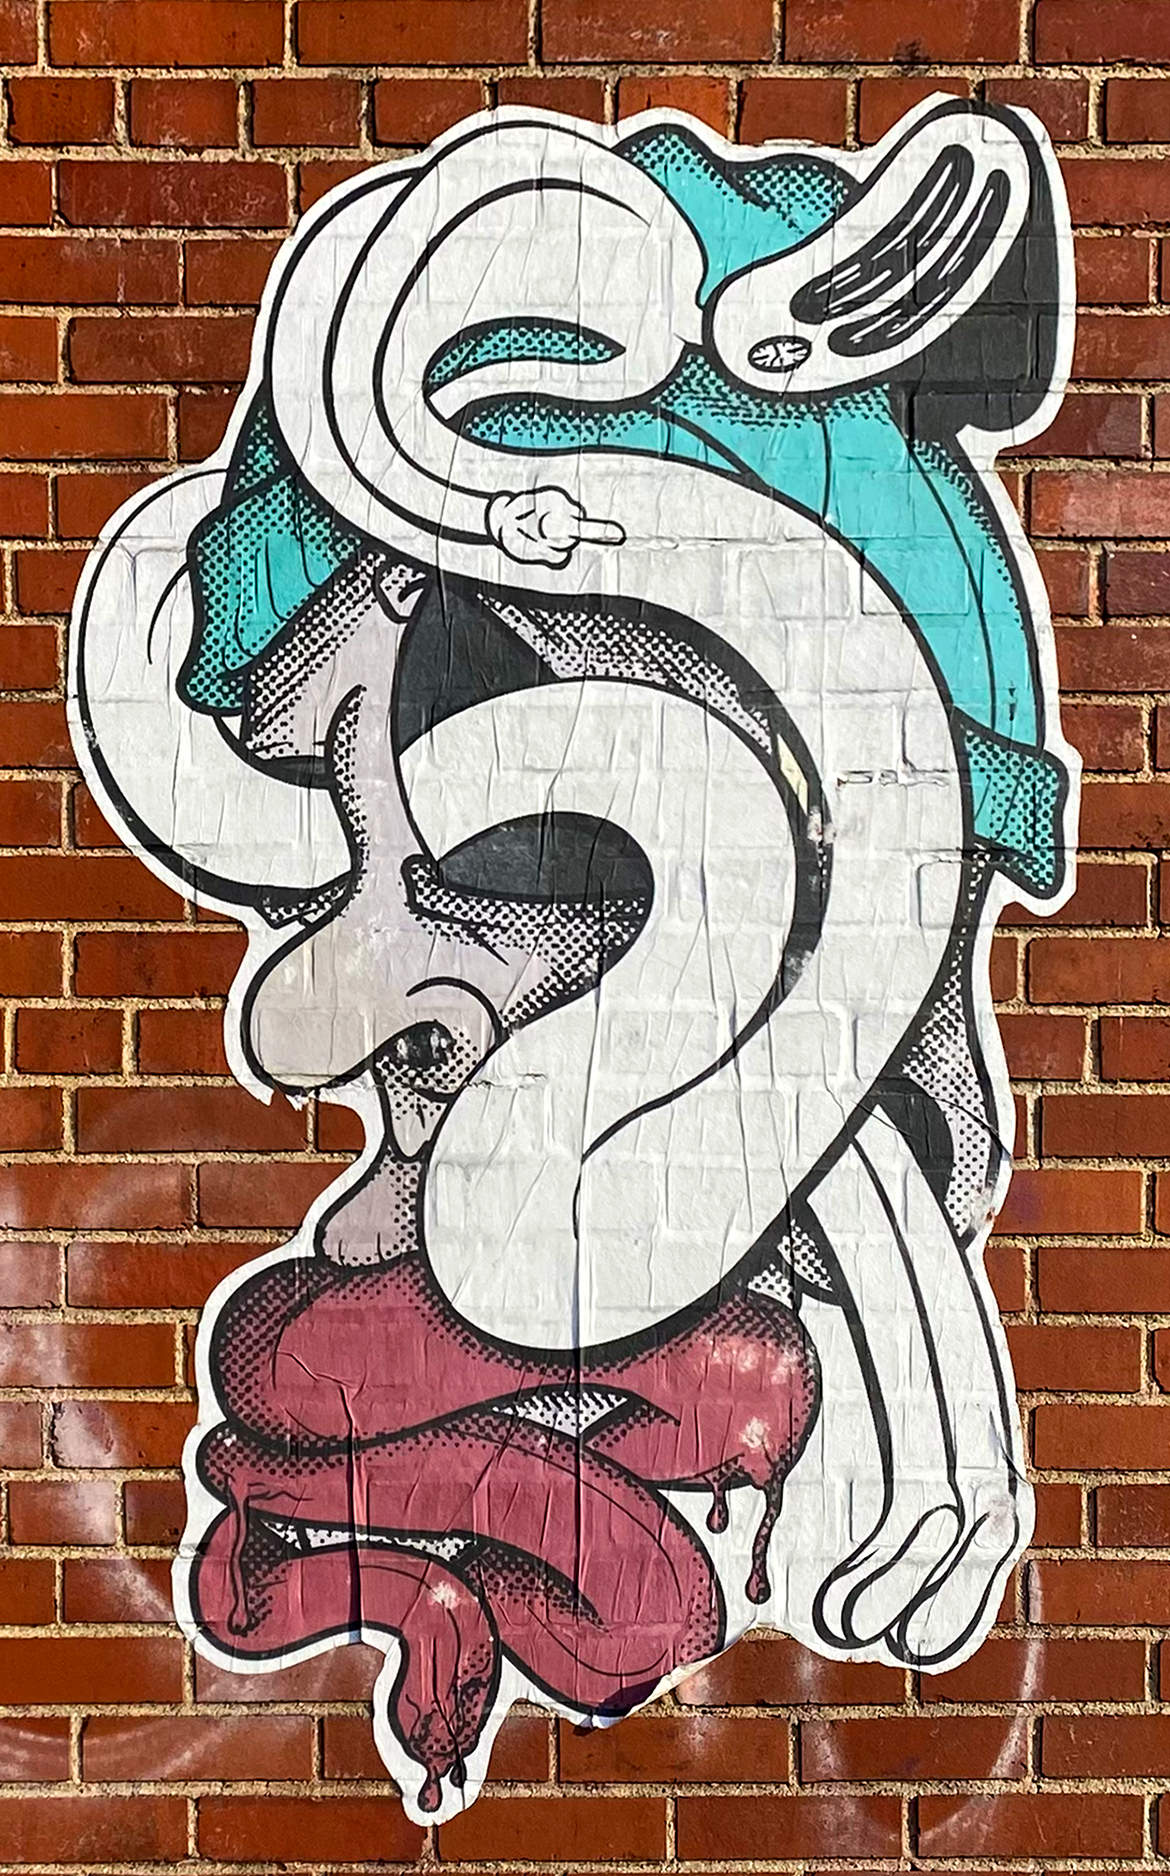 A large wheat pasted illustration of a ghost weaving through the ear and eyes of a man wearing a blue beanie